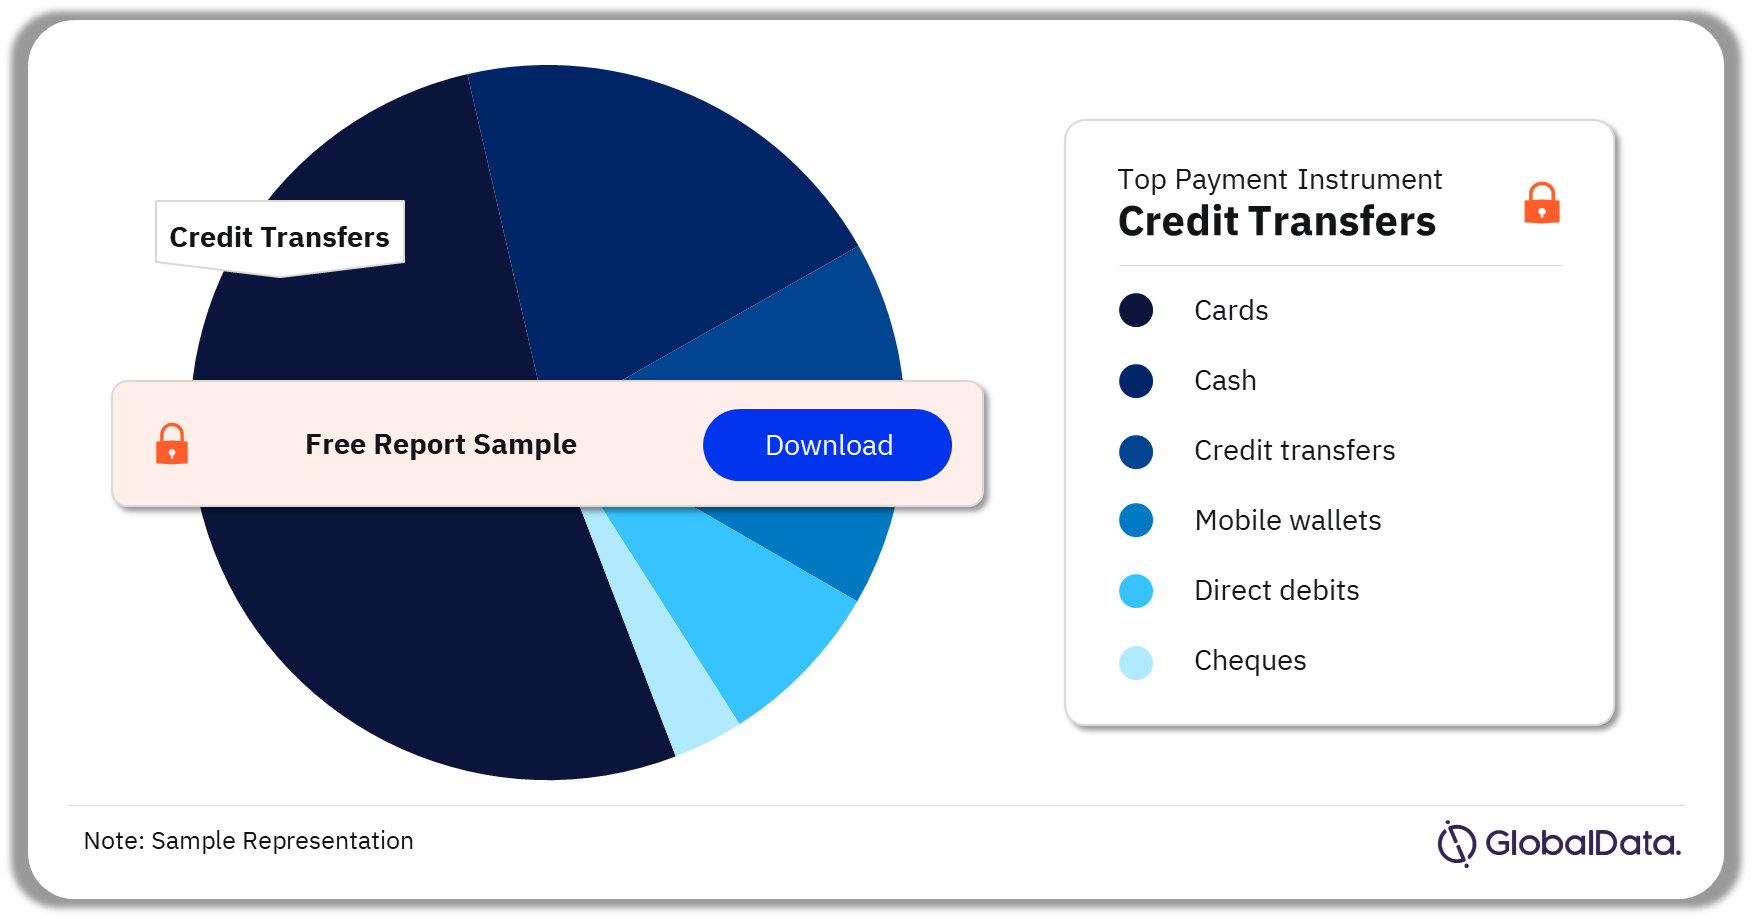 Singapore Cards and Payments Market Analysis by Payment Instruments, 2023 (%)